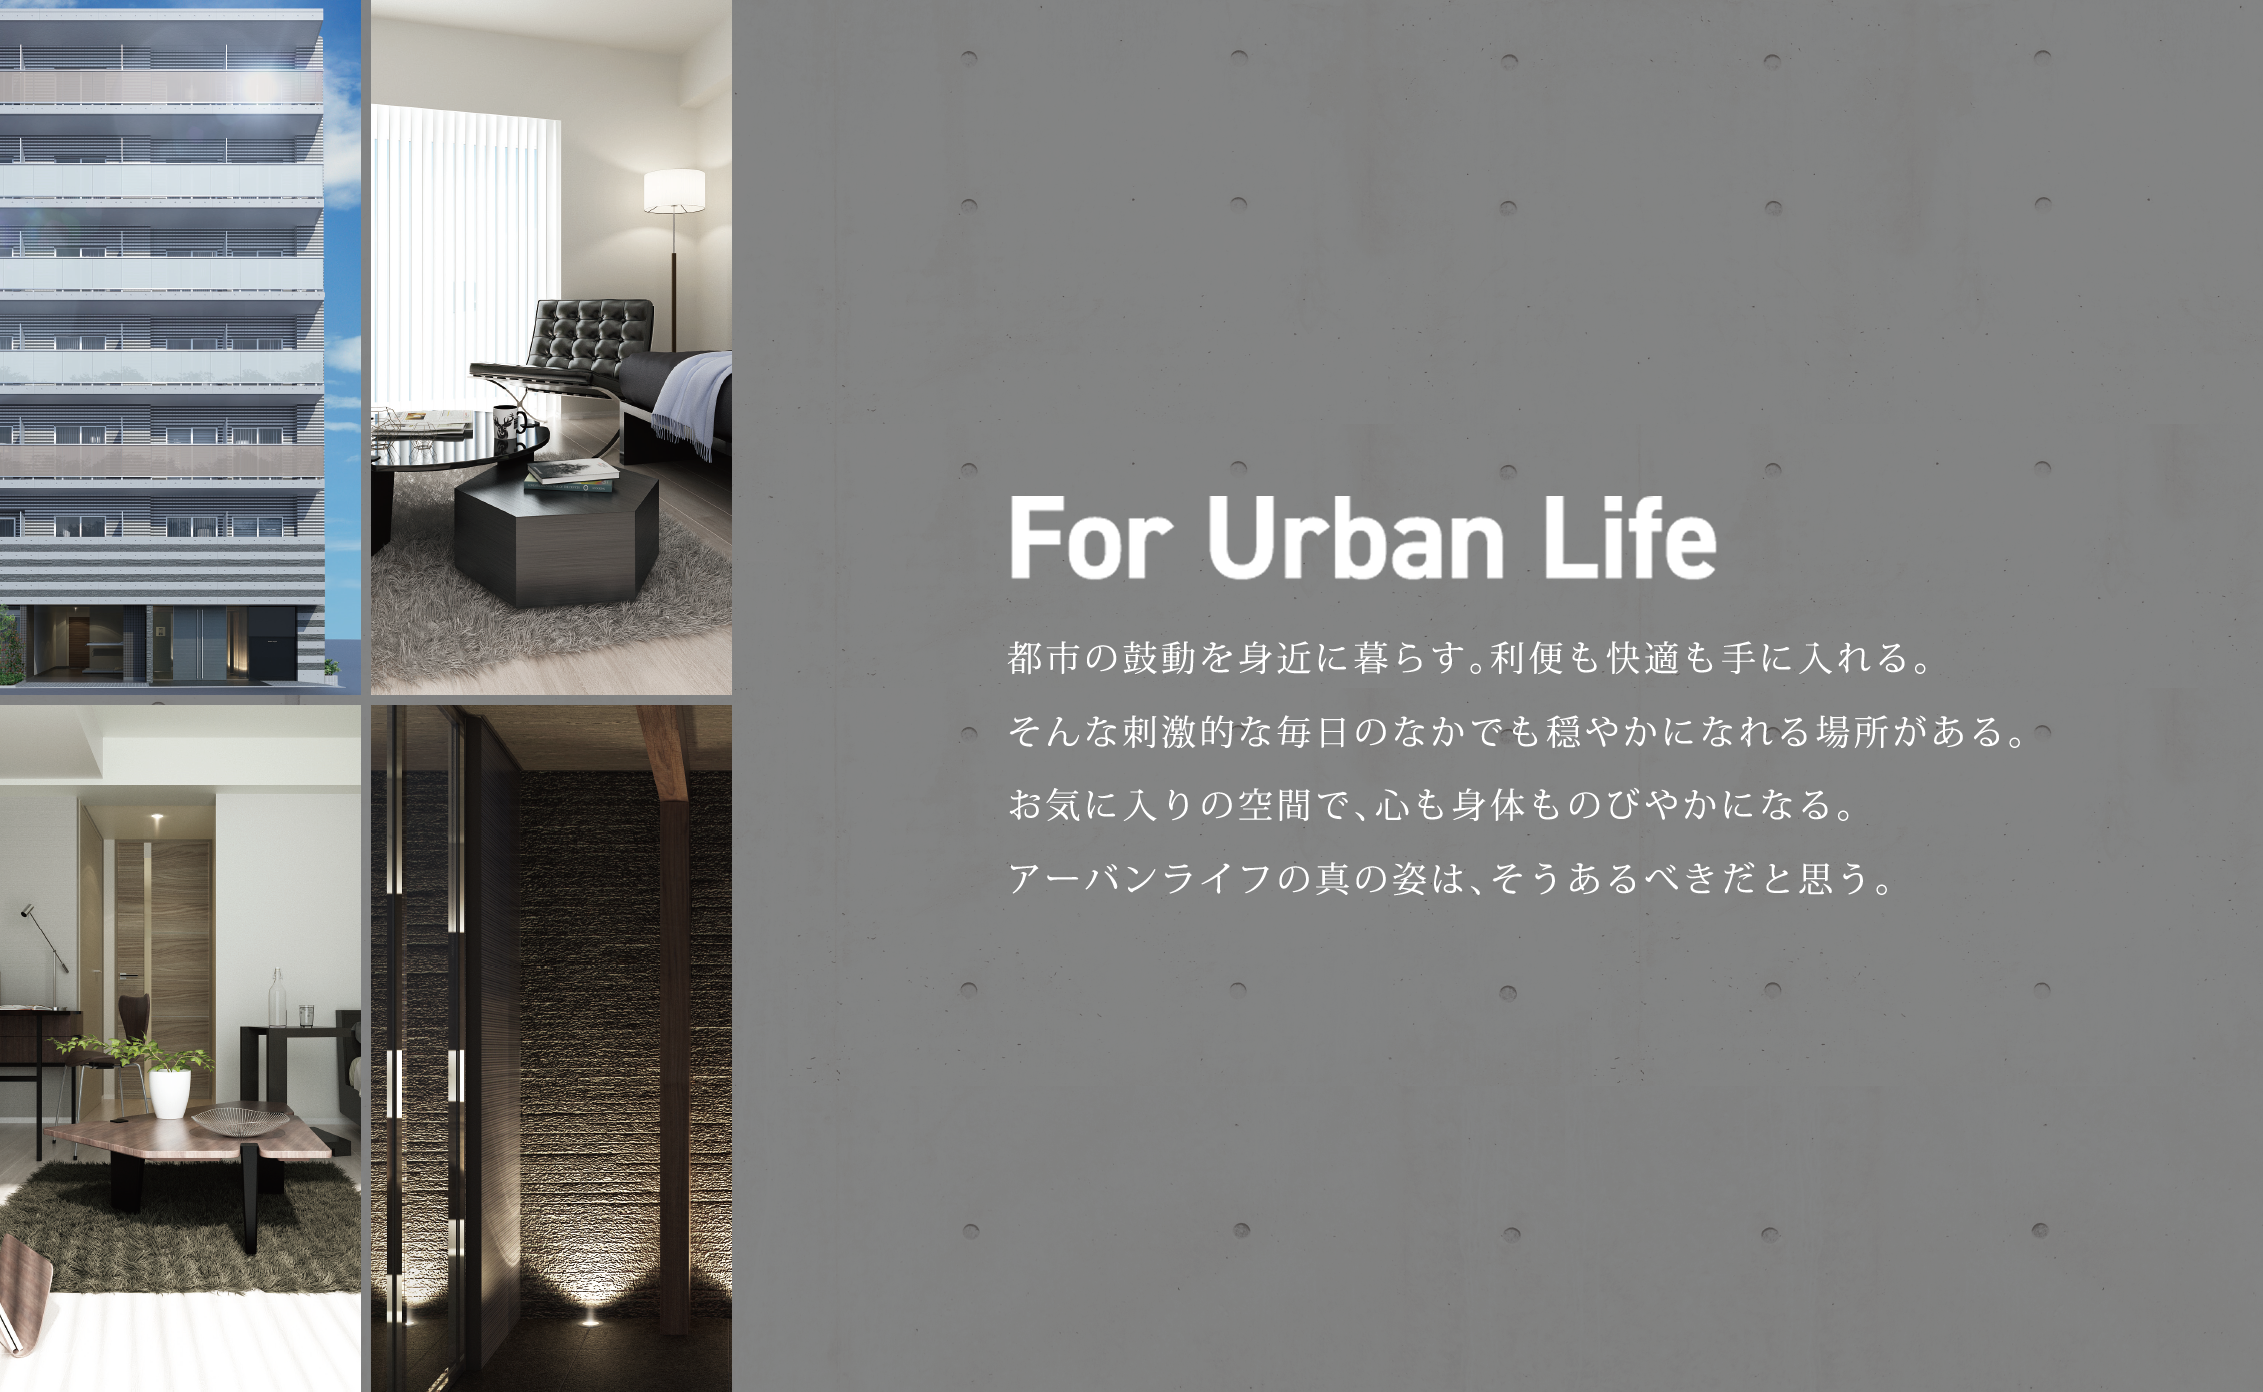 For Urban Life